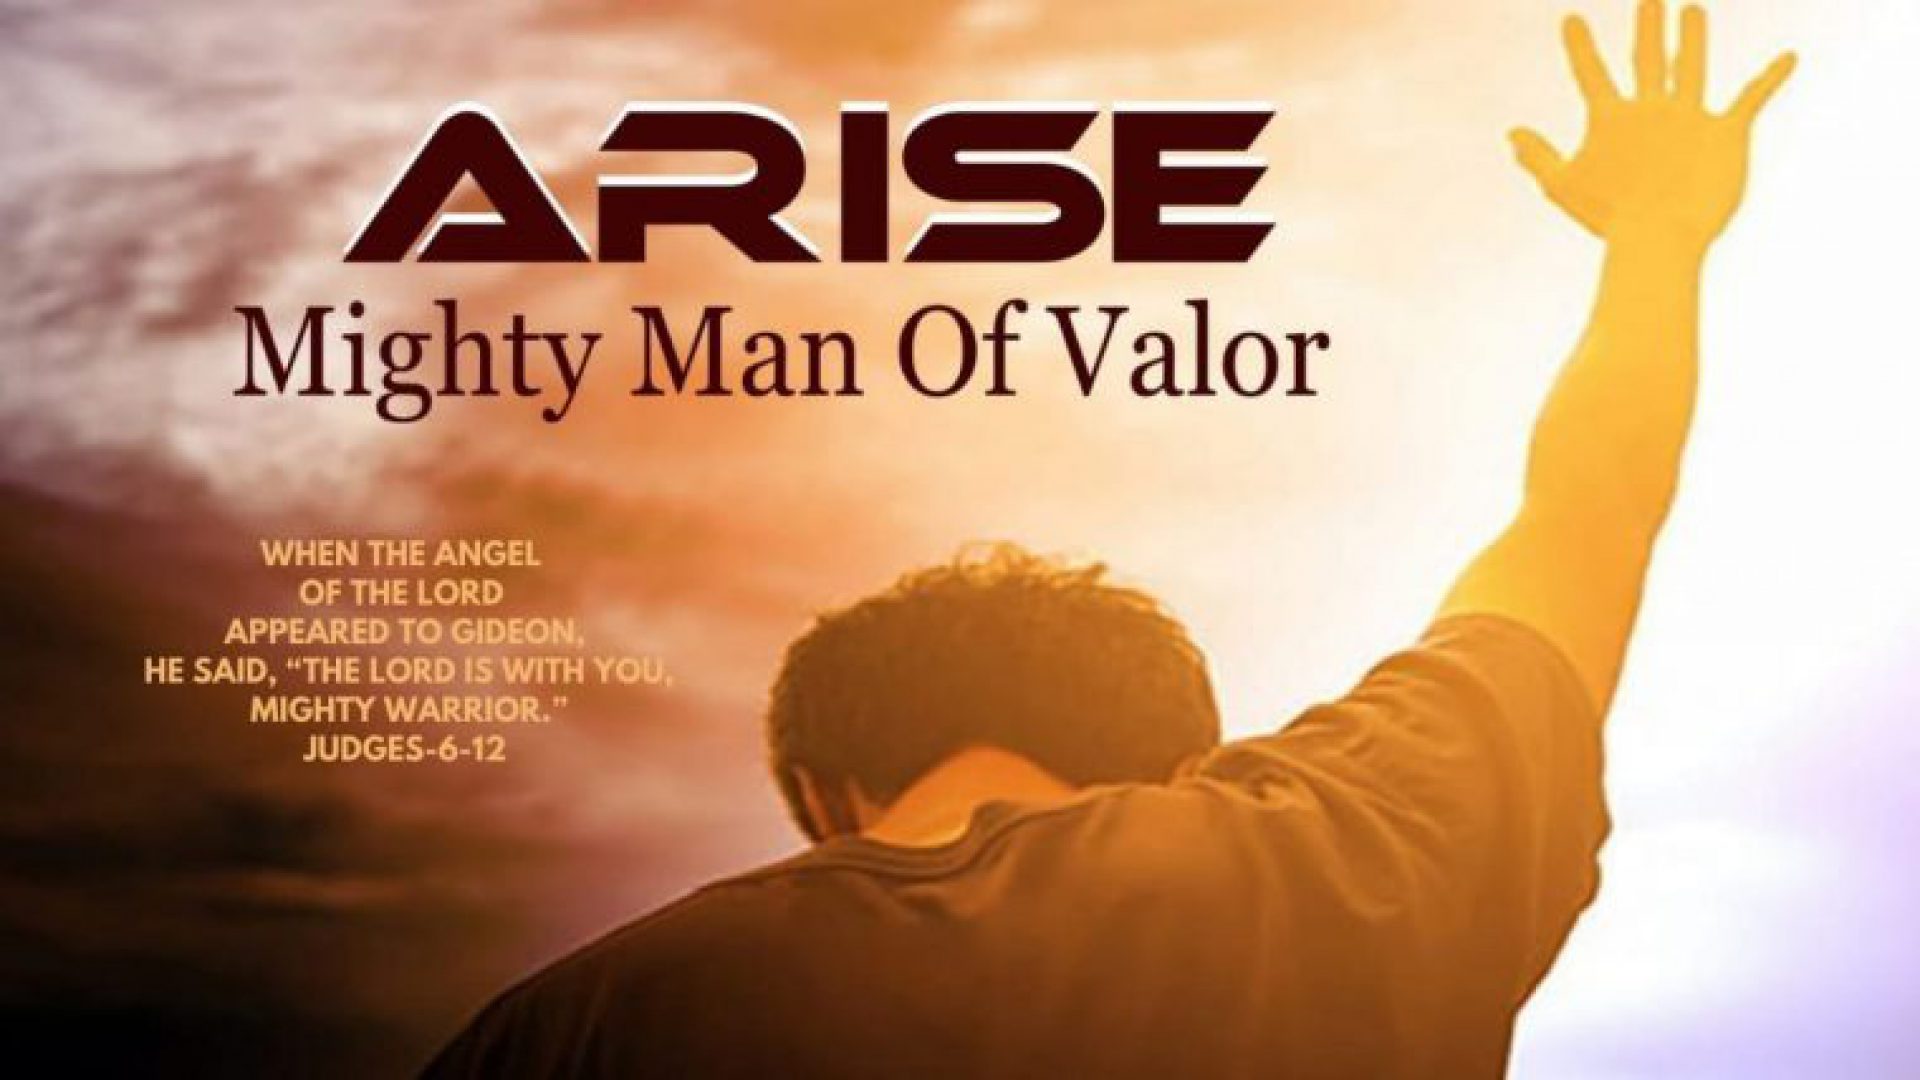 Mighty Man Of Valor